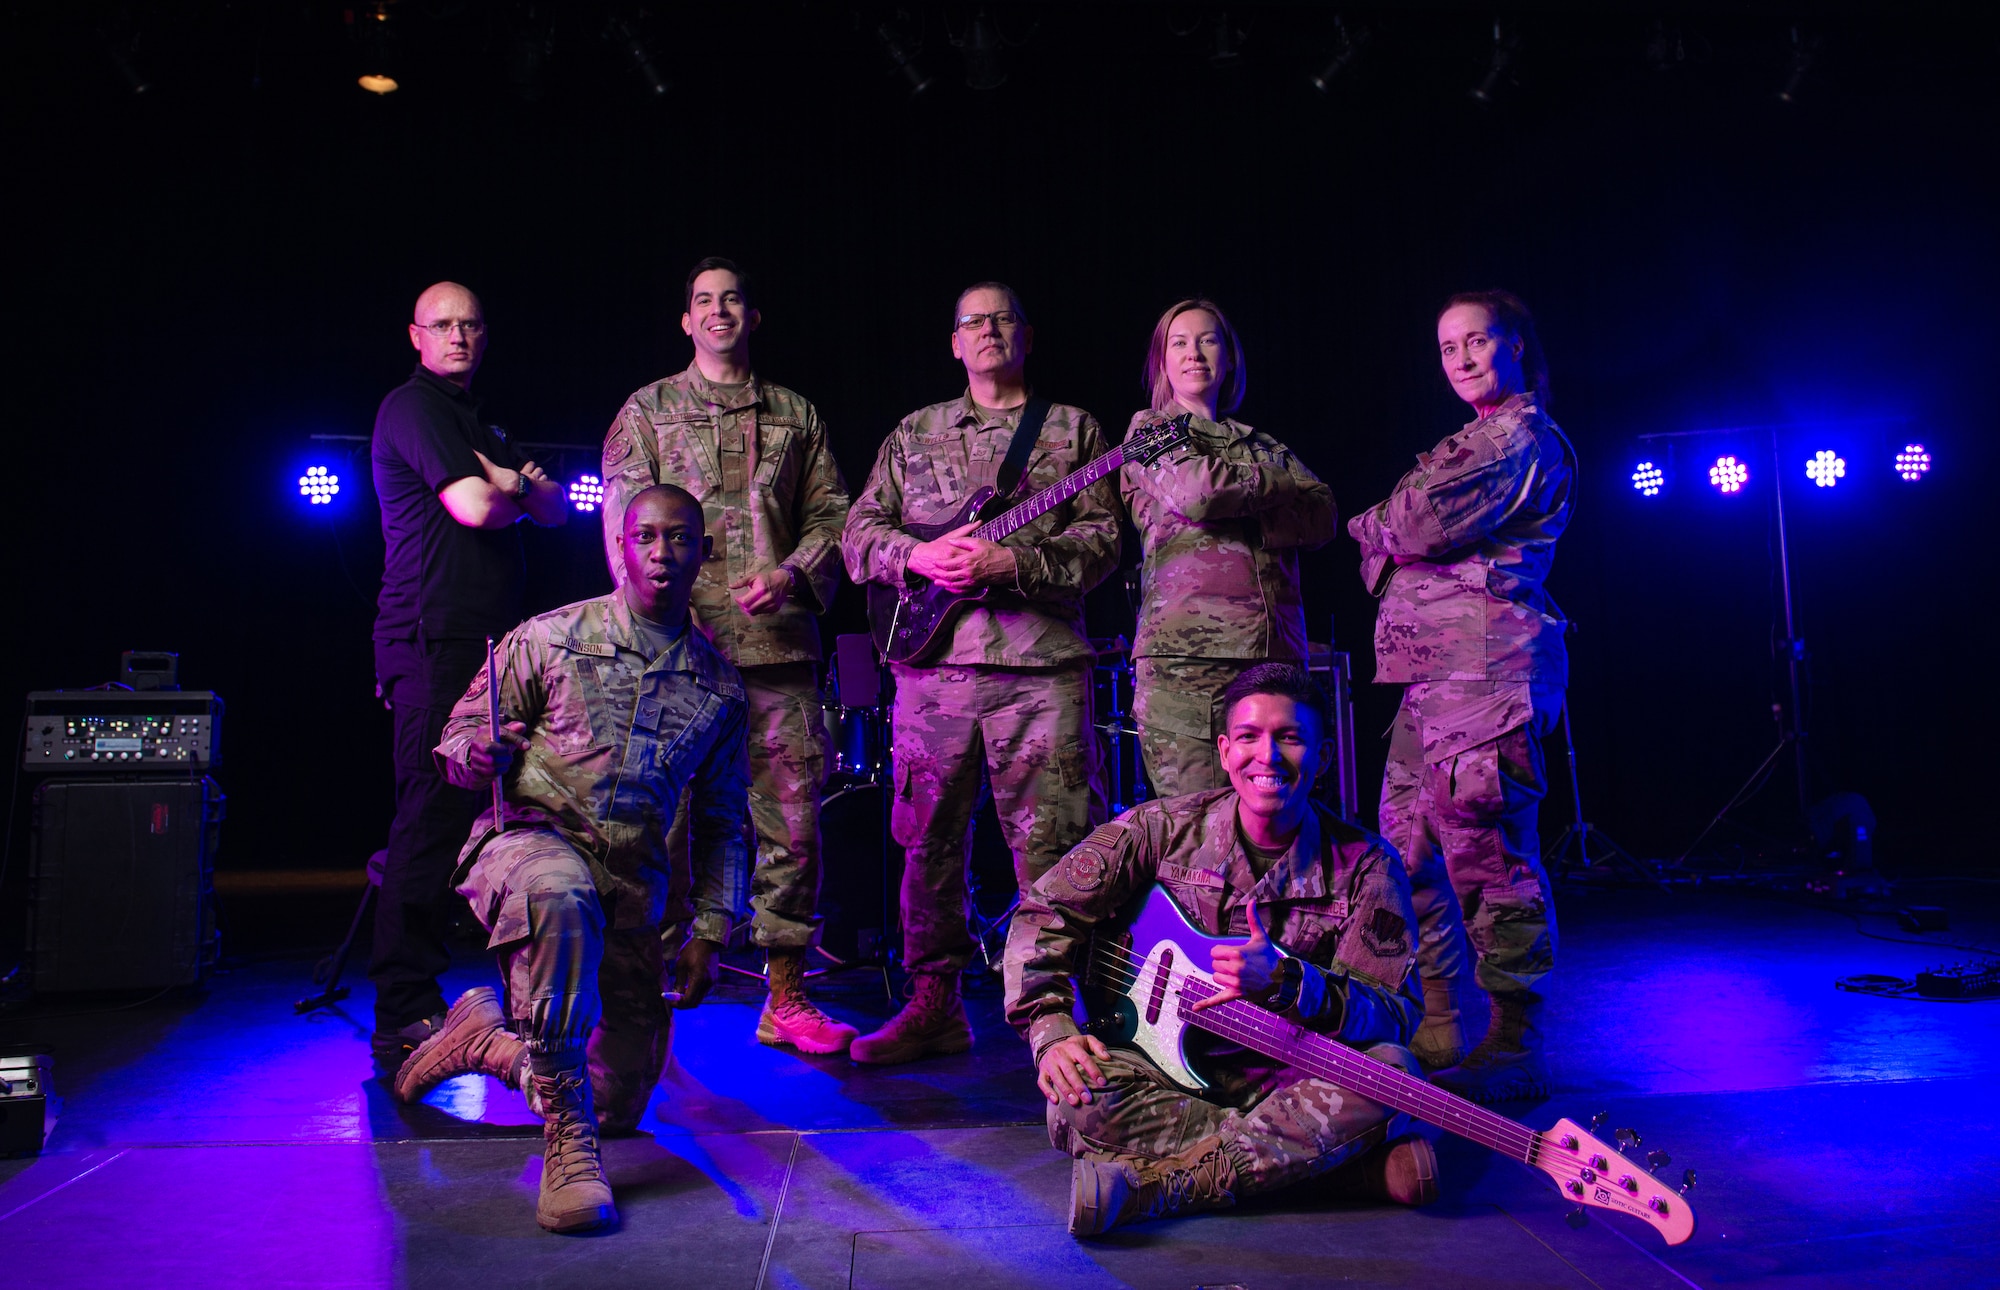 Uniformed Airmen pose for group photo on stage